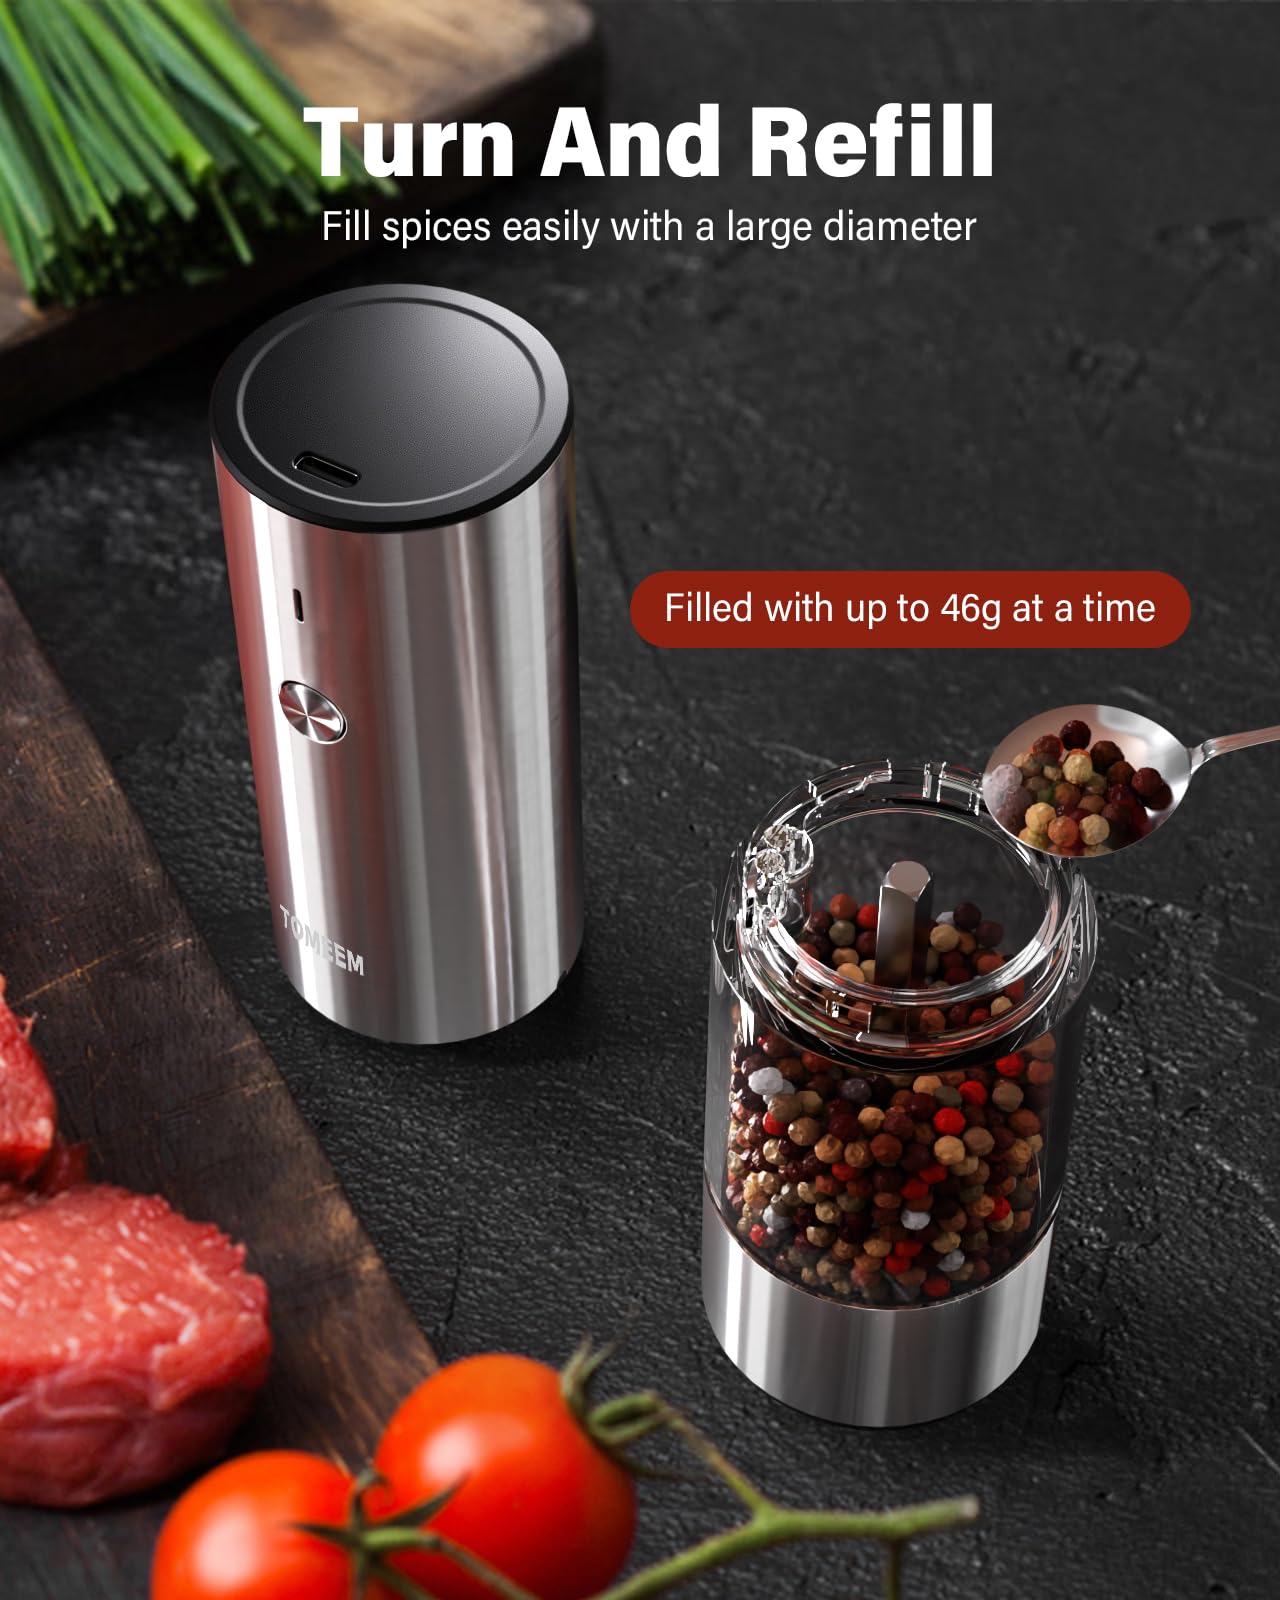 [Upgraded Larger Capacity] Electric Salt and Pepper Grinder Set Rechargeable with LED lights - Stainless Steel Automatic Pepper Grinder and Salt Grinder Refillable with 6 Adjustable Coarseness